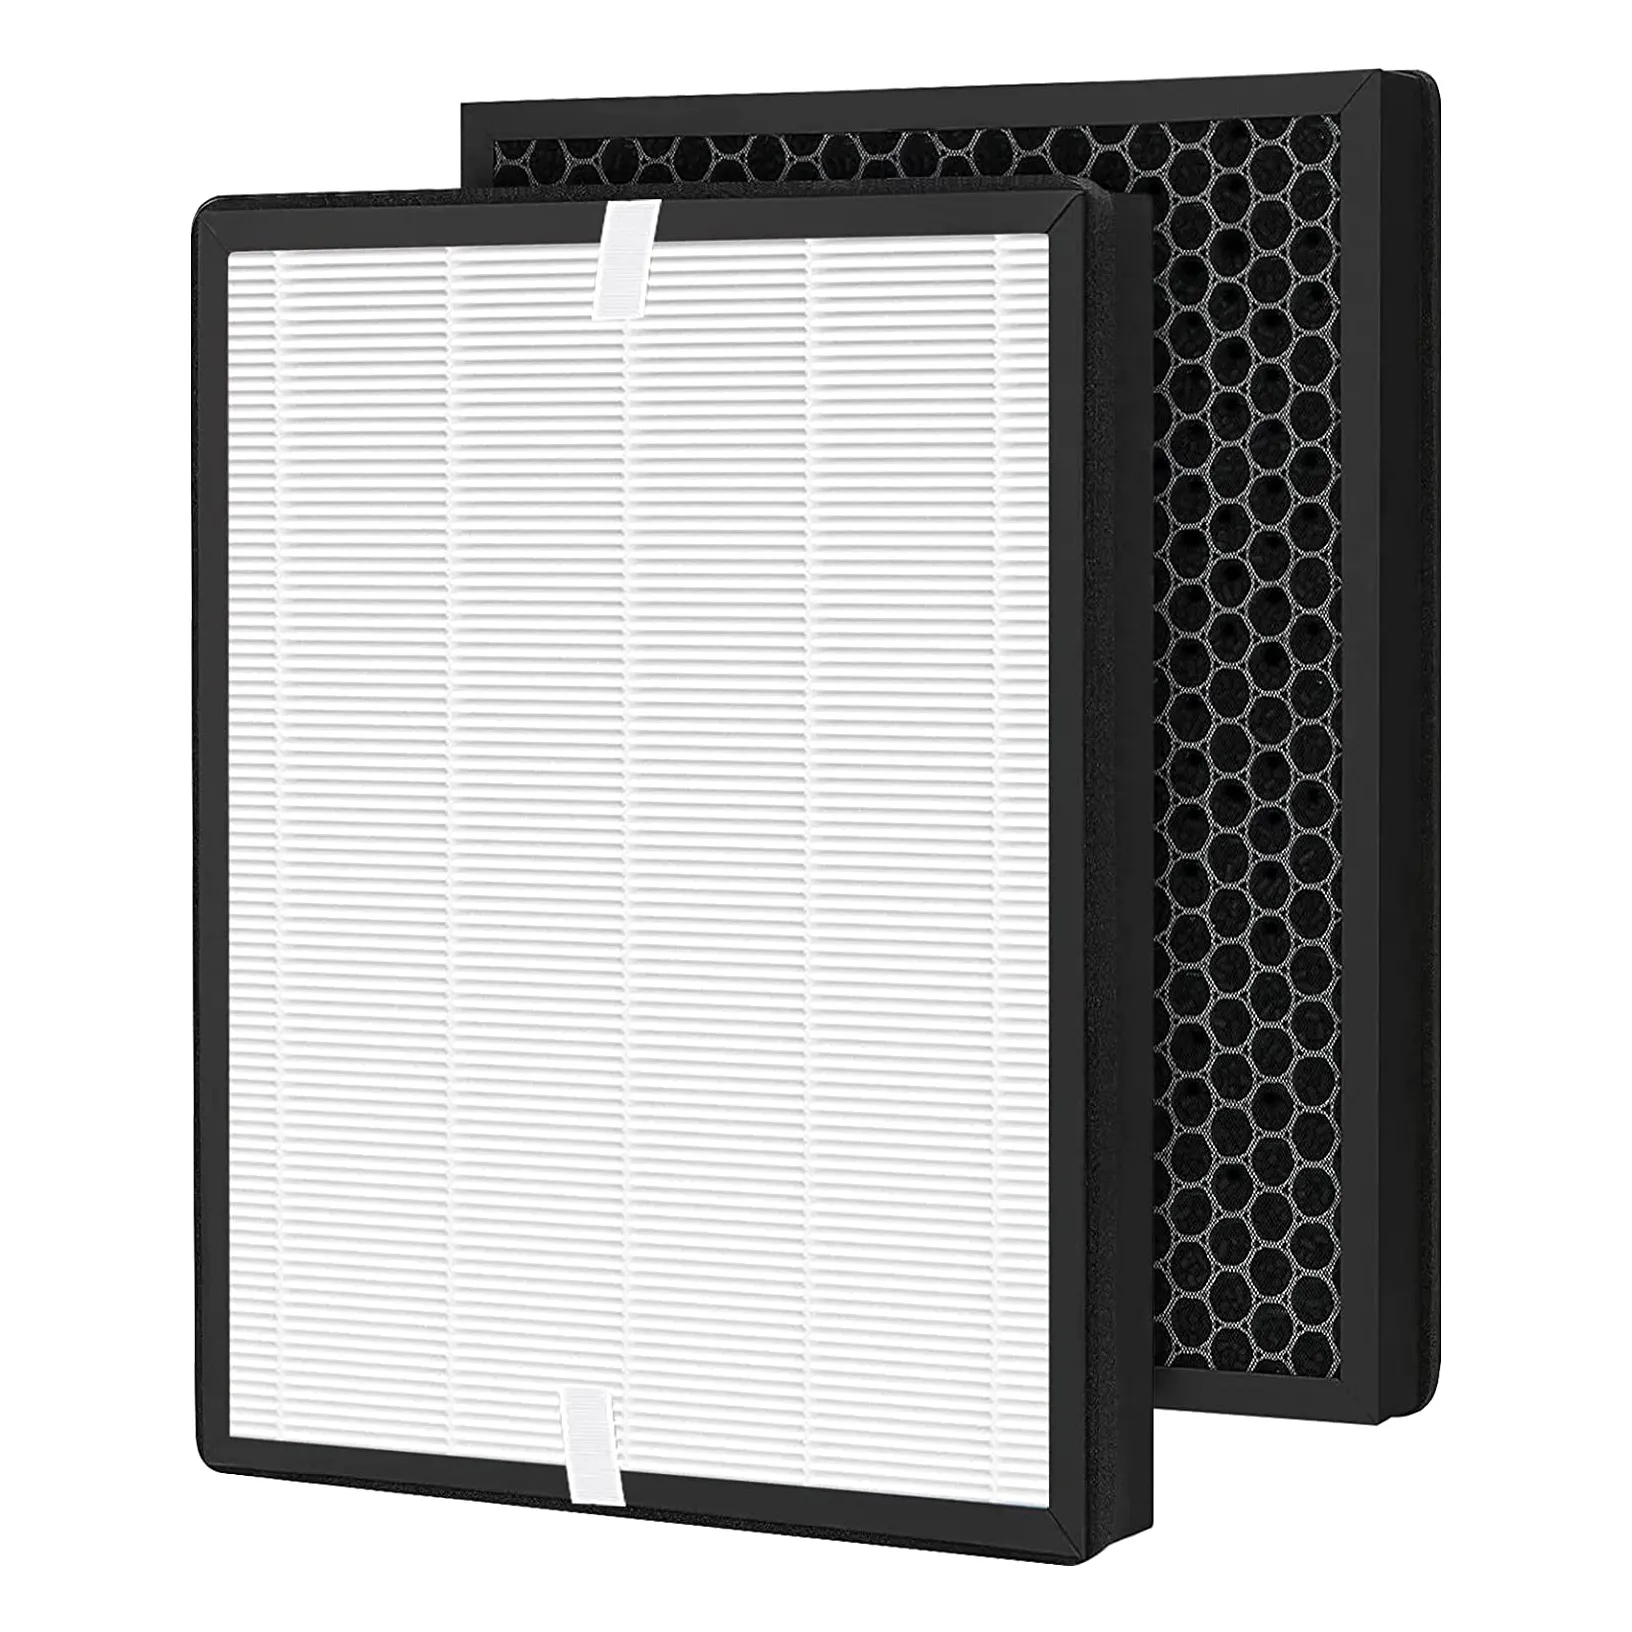 FA500 True HEPA Activated Carbon Filter Replacement Set Compatible With FAMREE FA500 And Aiper KJ200 Air Cleaner Purifiers